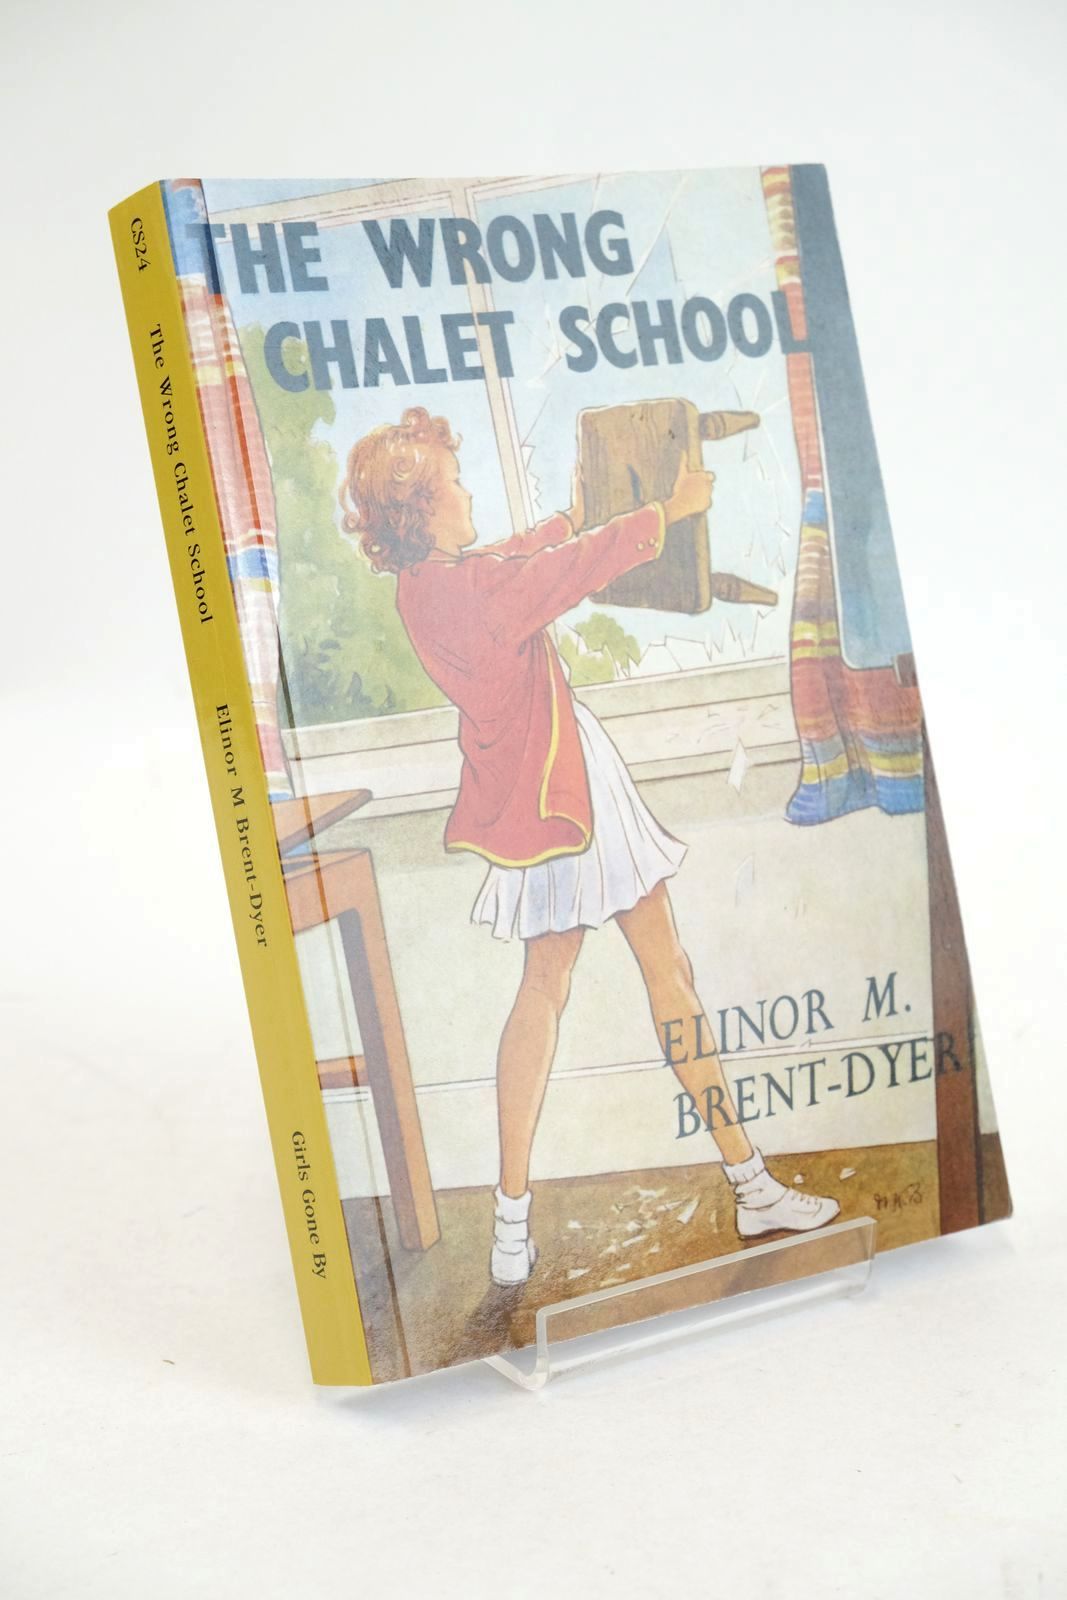 Photo of THE WRONG CHALET SCHOOL written by Brent-Dyer, Elinor M. published by Girls Gone By (STOCK CODE: 1325490)  for sale by Stella & Rose's Books